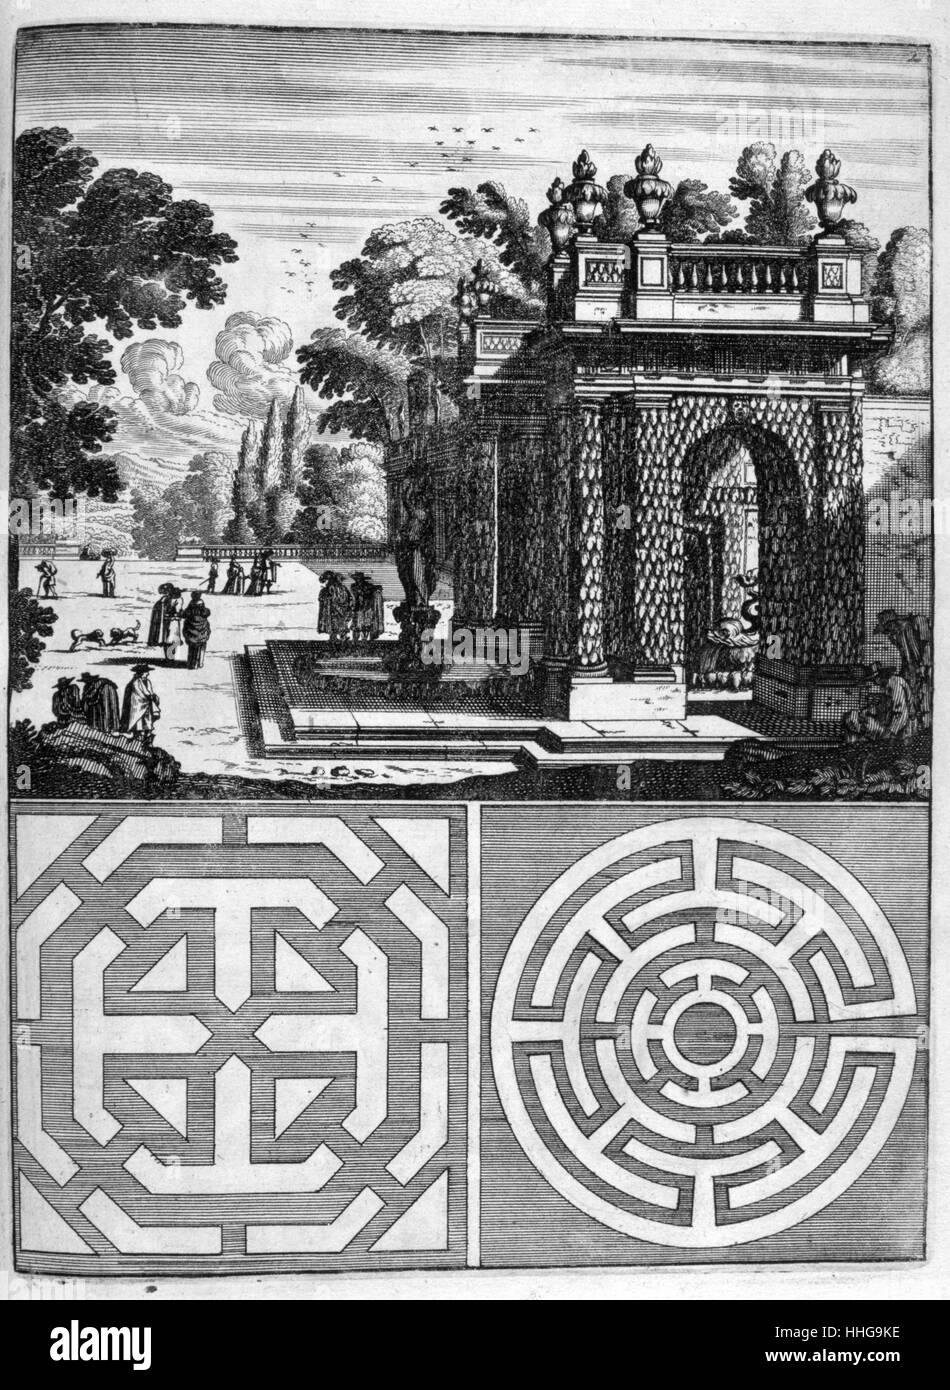 Country house with plan for a formal garden. for Illustration from the 17th century architecture book 'Architectura Curiosa Nova' 1664, by Georgium Bocklern Stock Photo